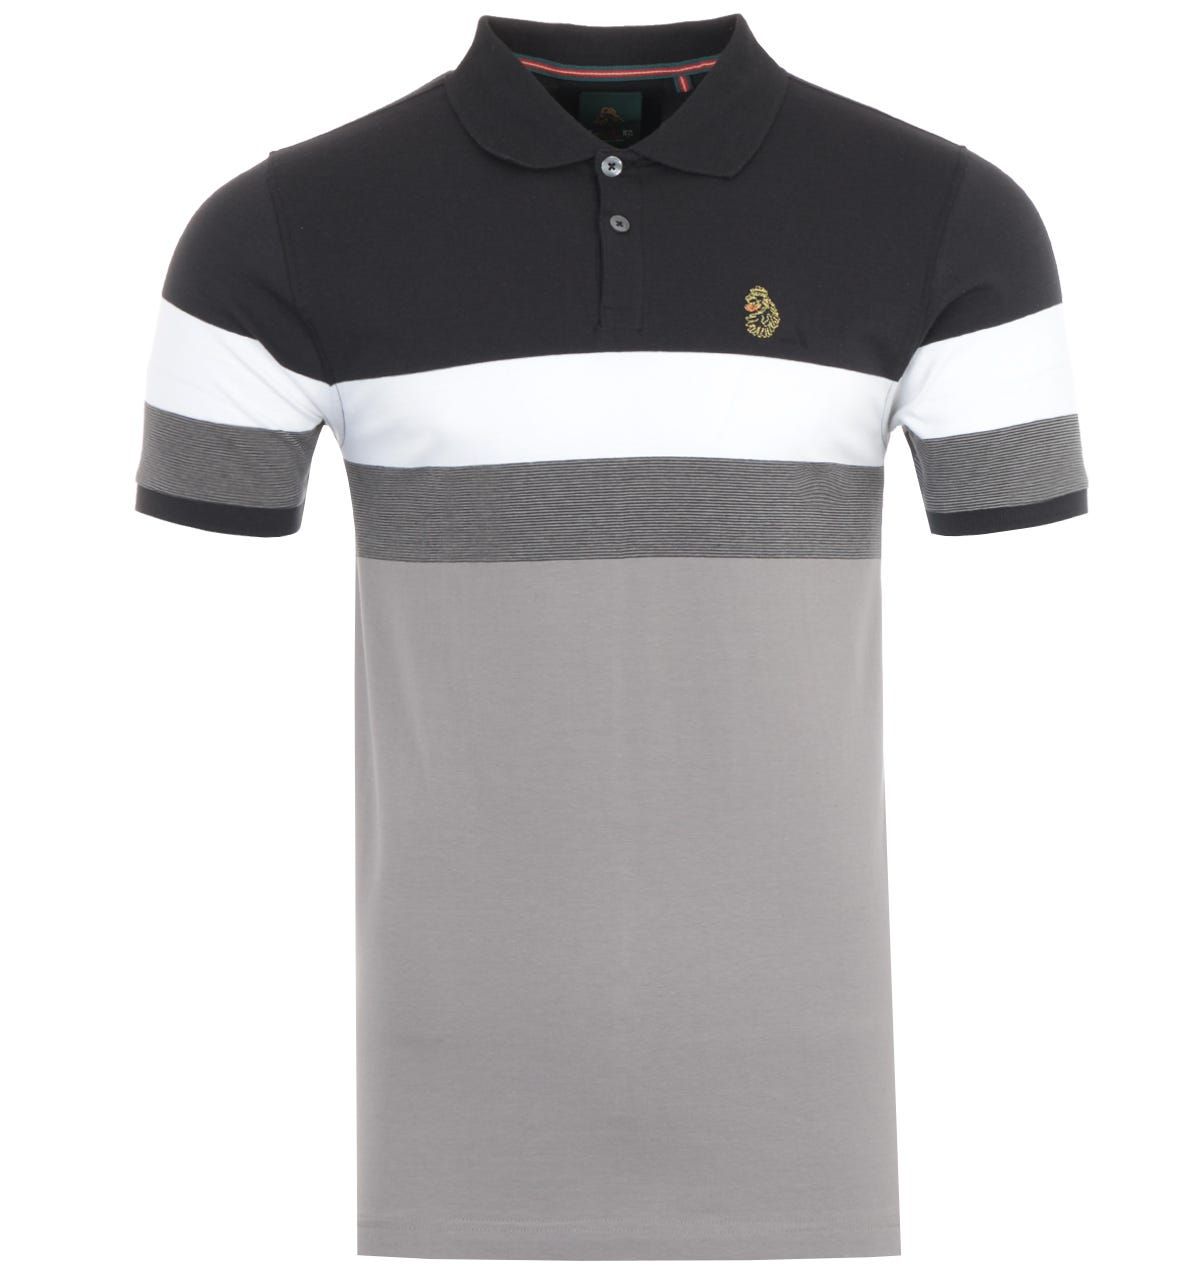 Luke 1977 is, without a doubt, the go-to brand if you\'re after well crafted, witty and masculine products. Finished with the signature Luke Lion logo, you\'re looking at one of the UK\'s top contemporary menswear brands.The Shuffle Polo Shirt is crafted from a soft stretch cotton jersey. In a classic polo shirt design with a colour block pattern with wide and thin contrasting stripes across the chest. Featuring a two button placket and short sleeves. Finished with the iconic Luke Lion embroidered at the chest.Regular FitStretch Cotton JerseyRibbed Polo CollarTwo Button PlacketShort SleevesColorblock Stripe DesignVented SeamsLuke 1977 BrandingStyle & Fit:Regular FitFits True to SizeComposition & Care:96% Cotton4% ElastaneMachine Wash